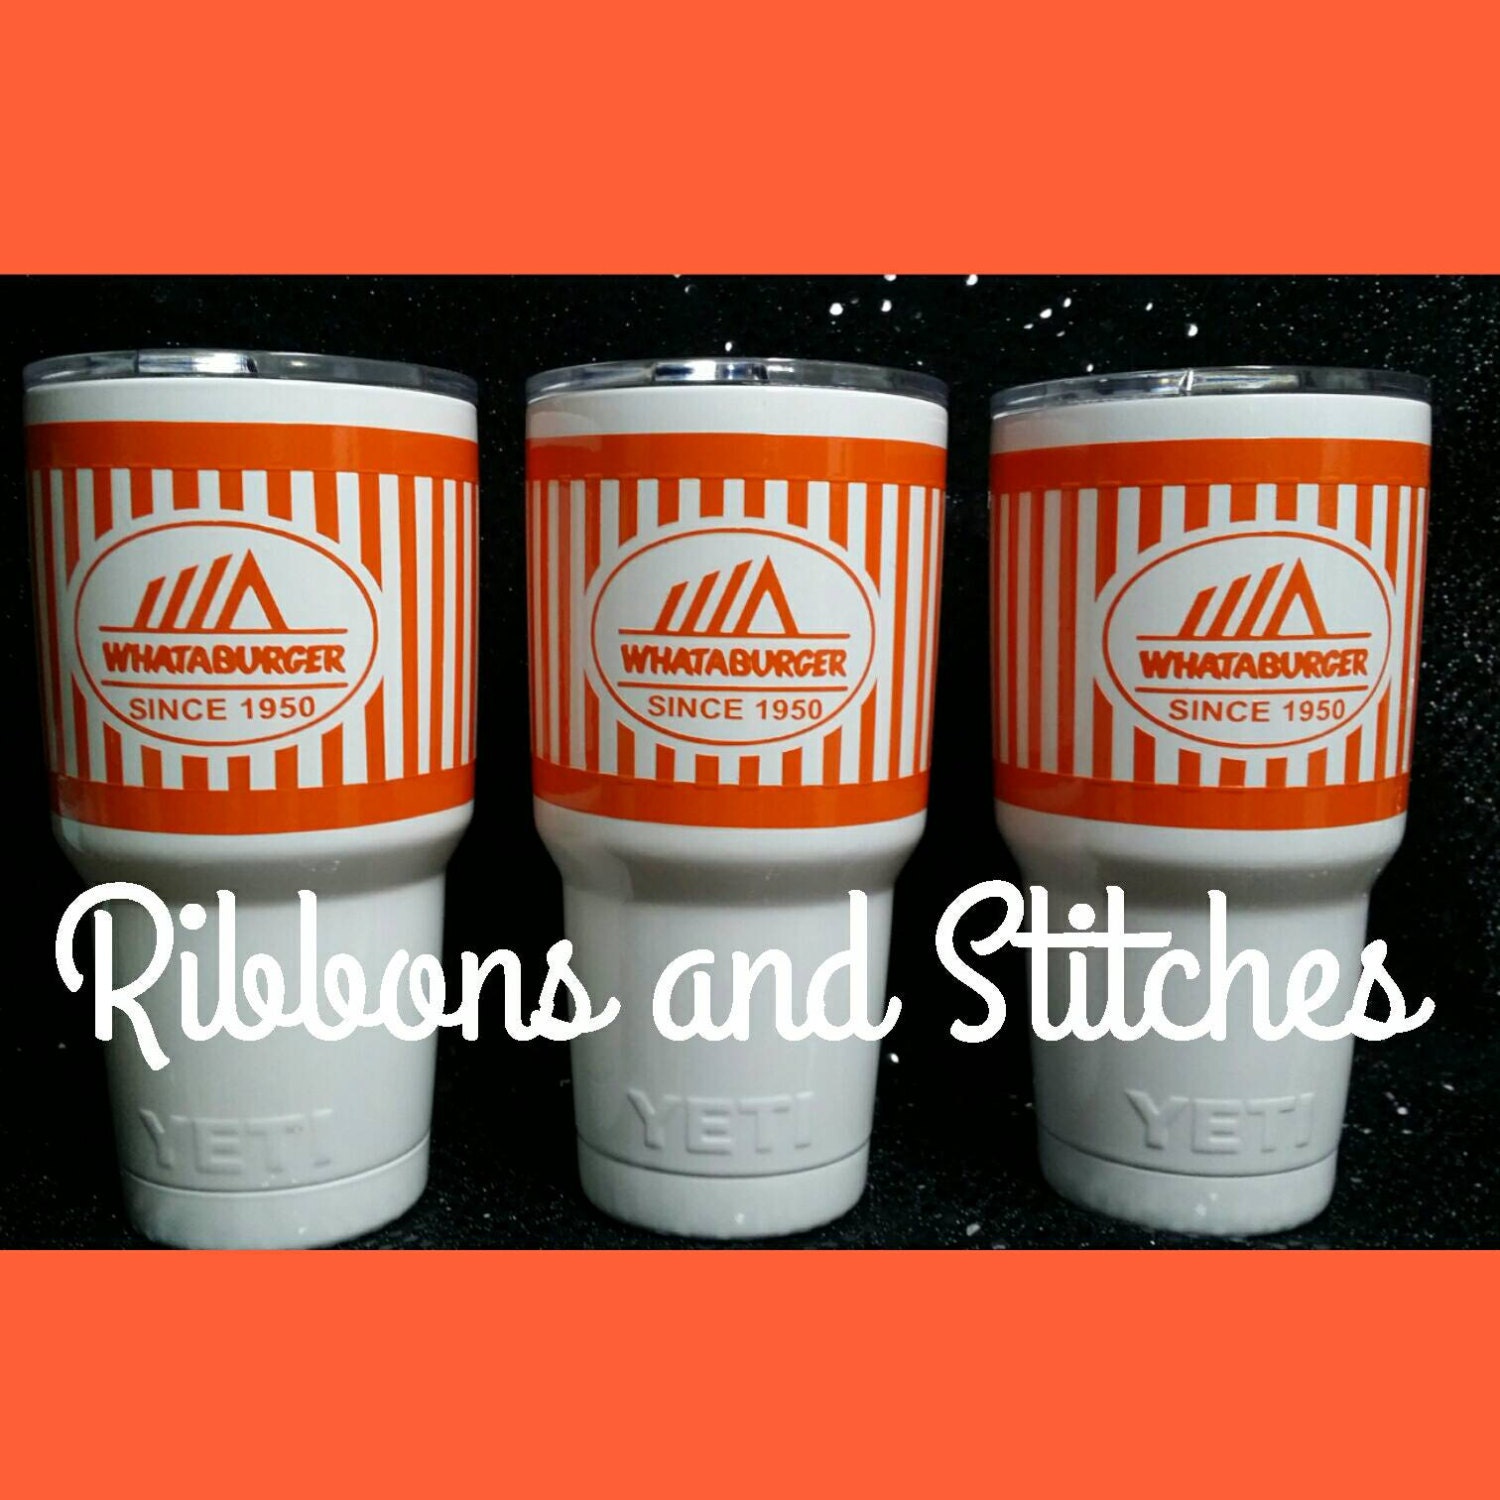 There's now an official Yeti tumbler that looks like a Whataburger cup